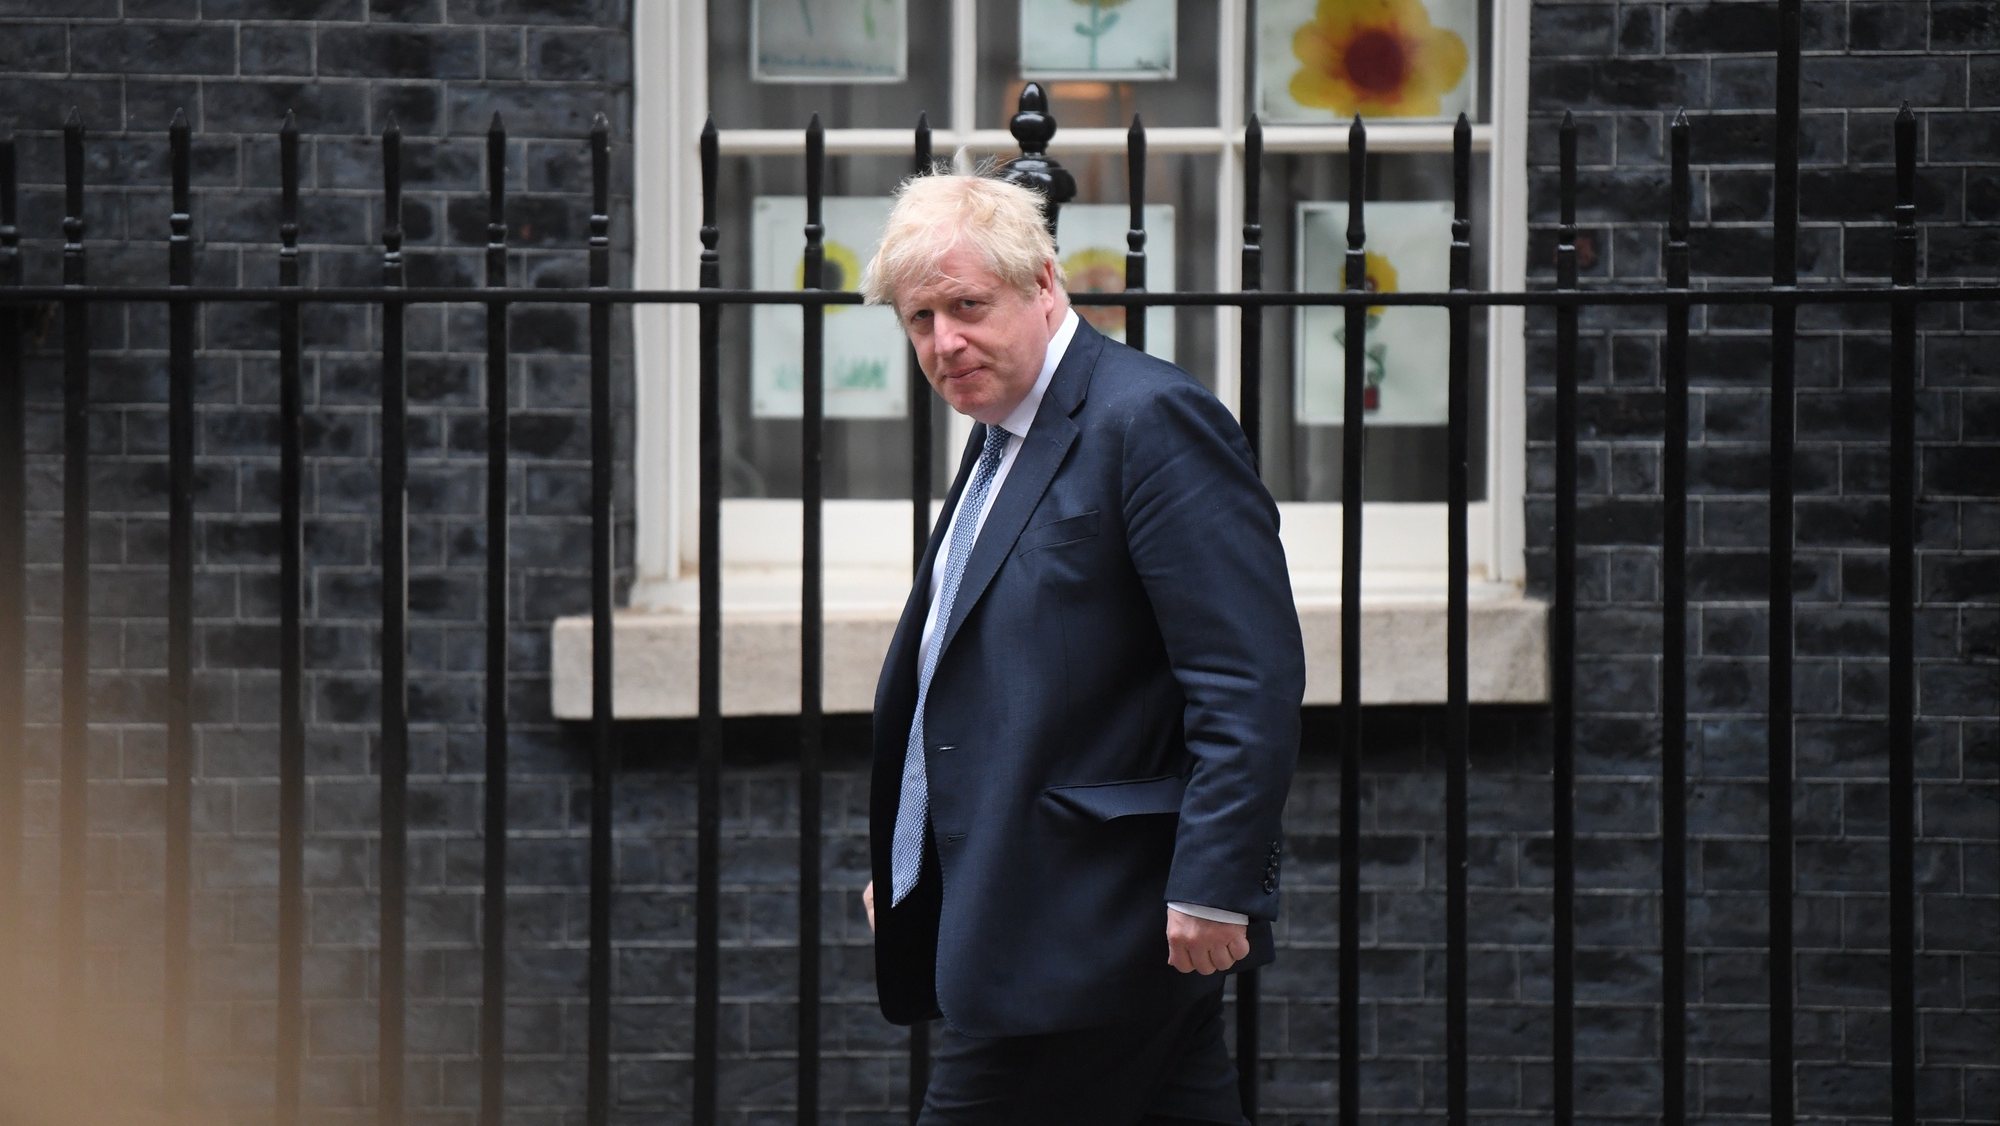 epa09937631 British Prime Minister Boris Johnson leaves Number 10 Downing Street in advance of the State Opening of Parliament in London, Britain, 10 May 2022. The British government is expected to promise to get the country &#039;back on track&#039; as it unveils its plans for the year ahead in the Queen&#039;s Speech.  EPA/NEIL HALL